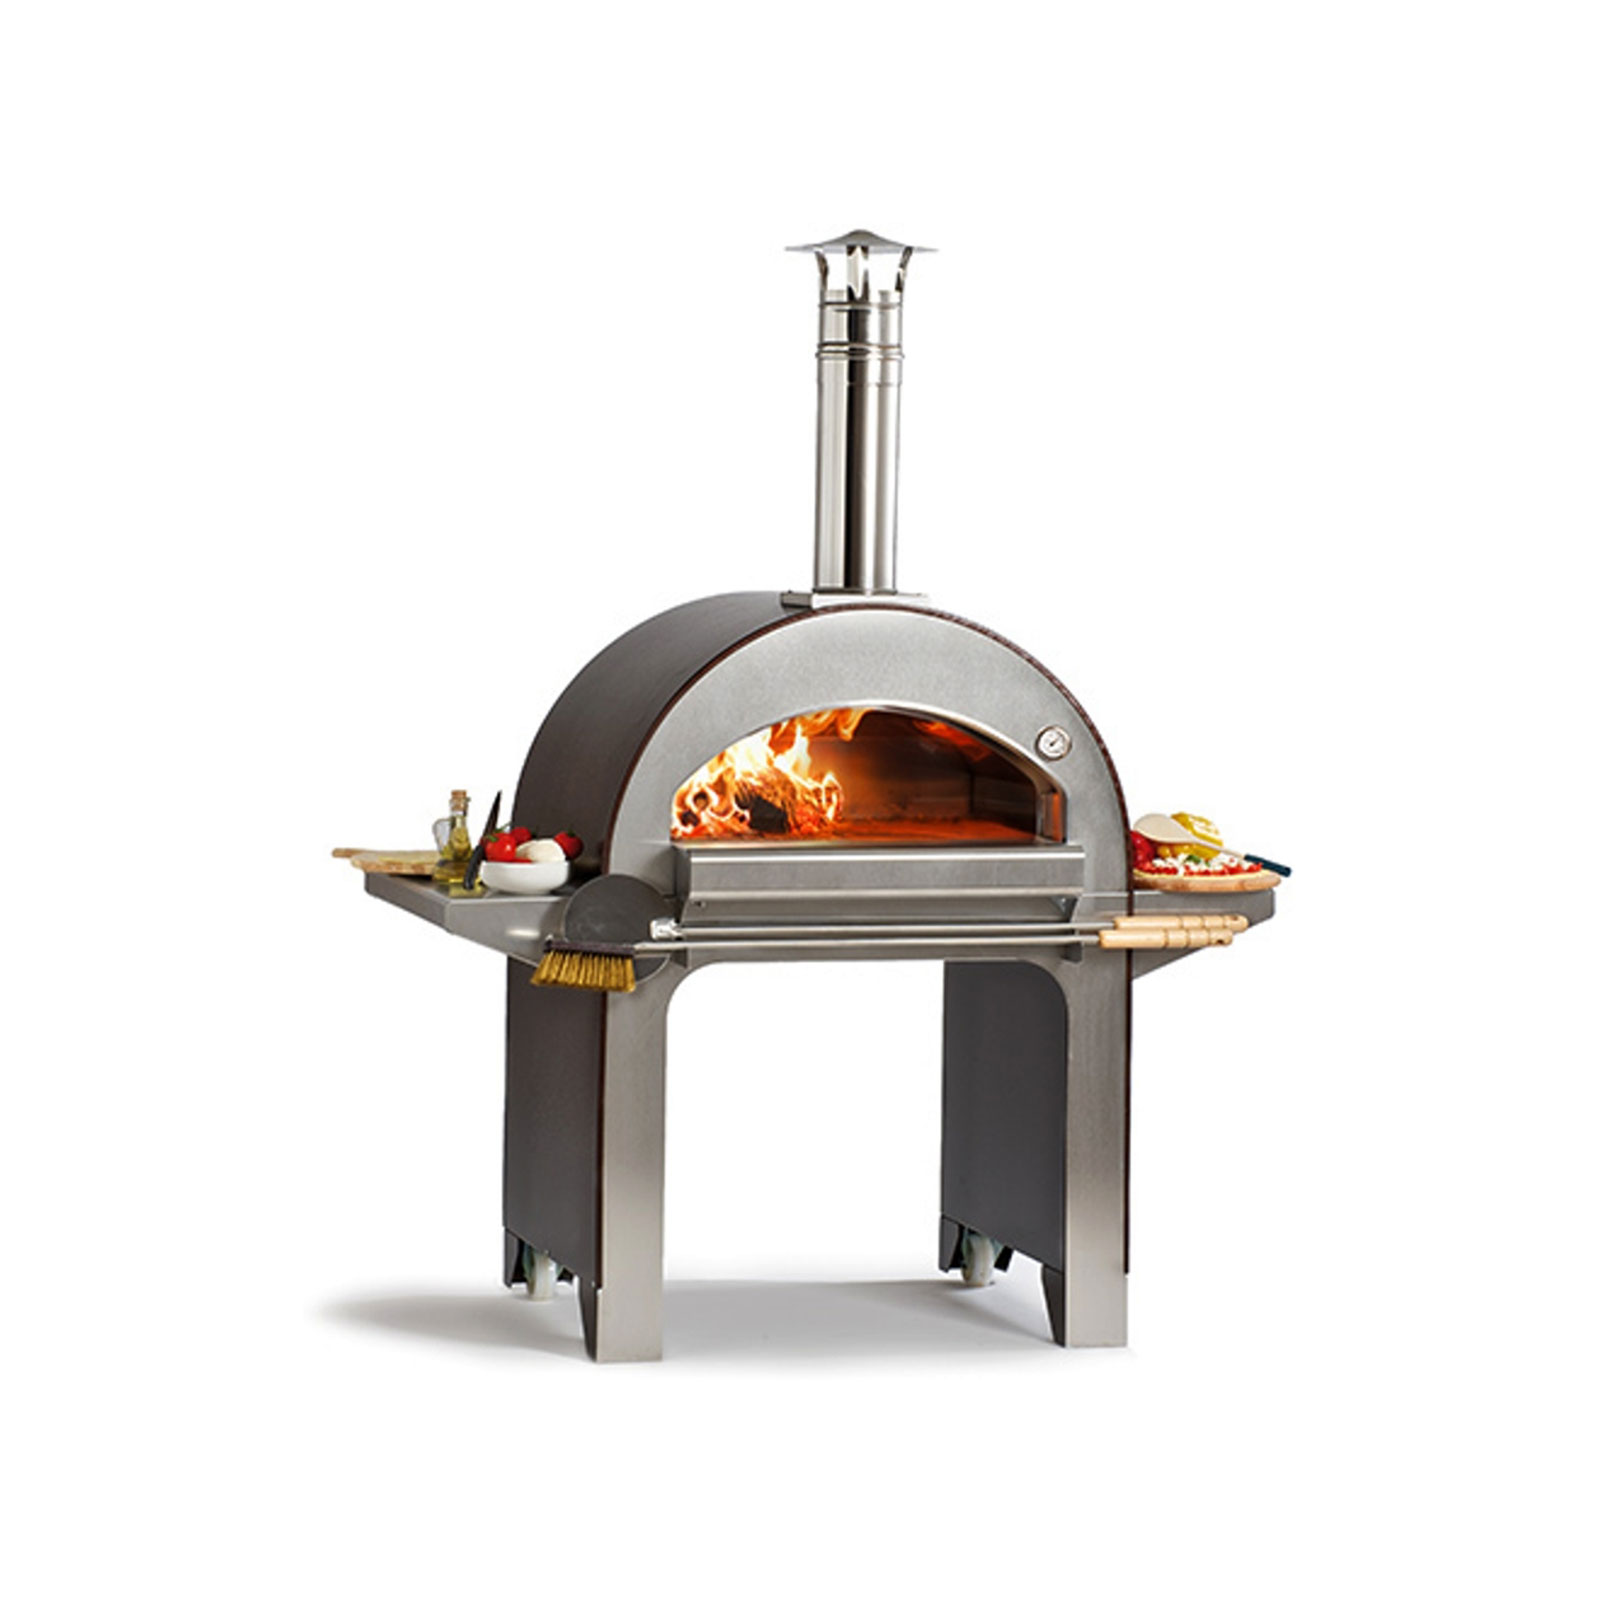 Alfa Wood Fired Pizza Oven - Forno 4 Pizze - Copper with Trolley Stand